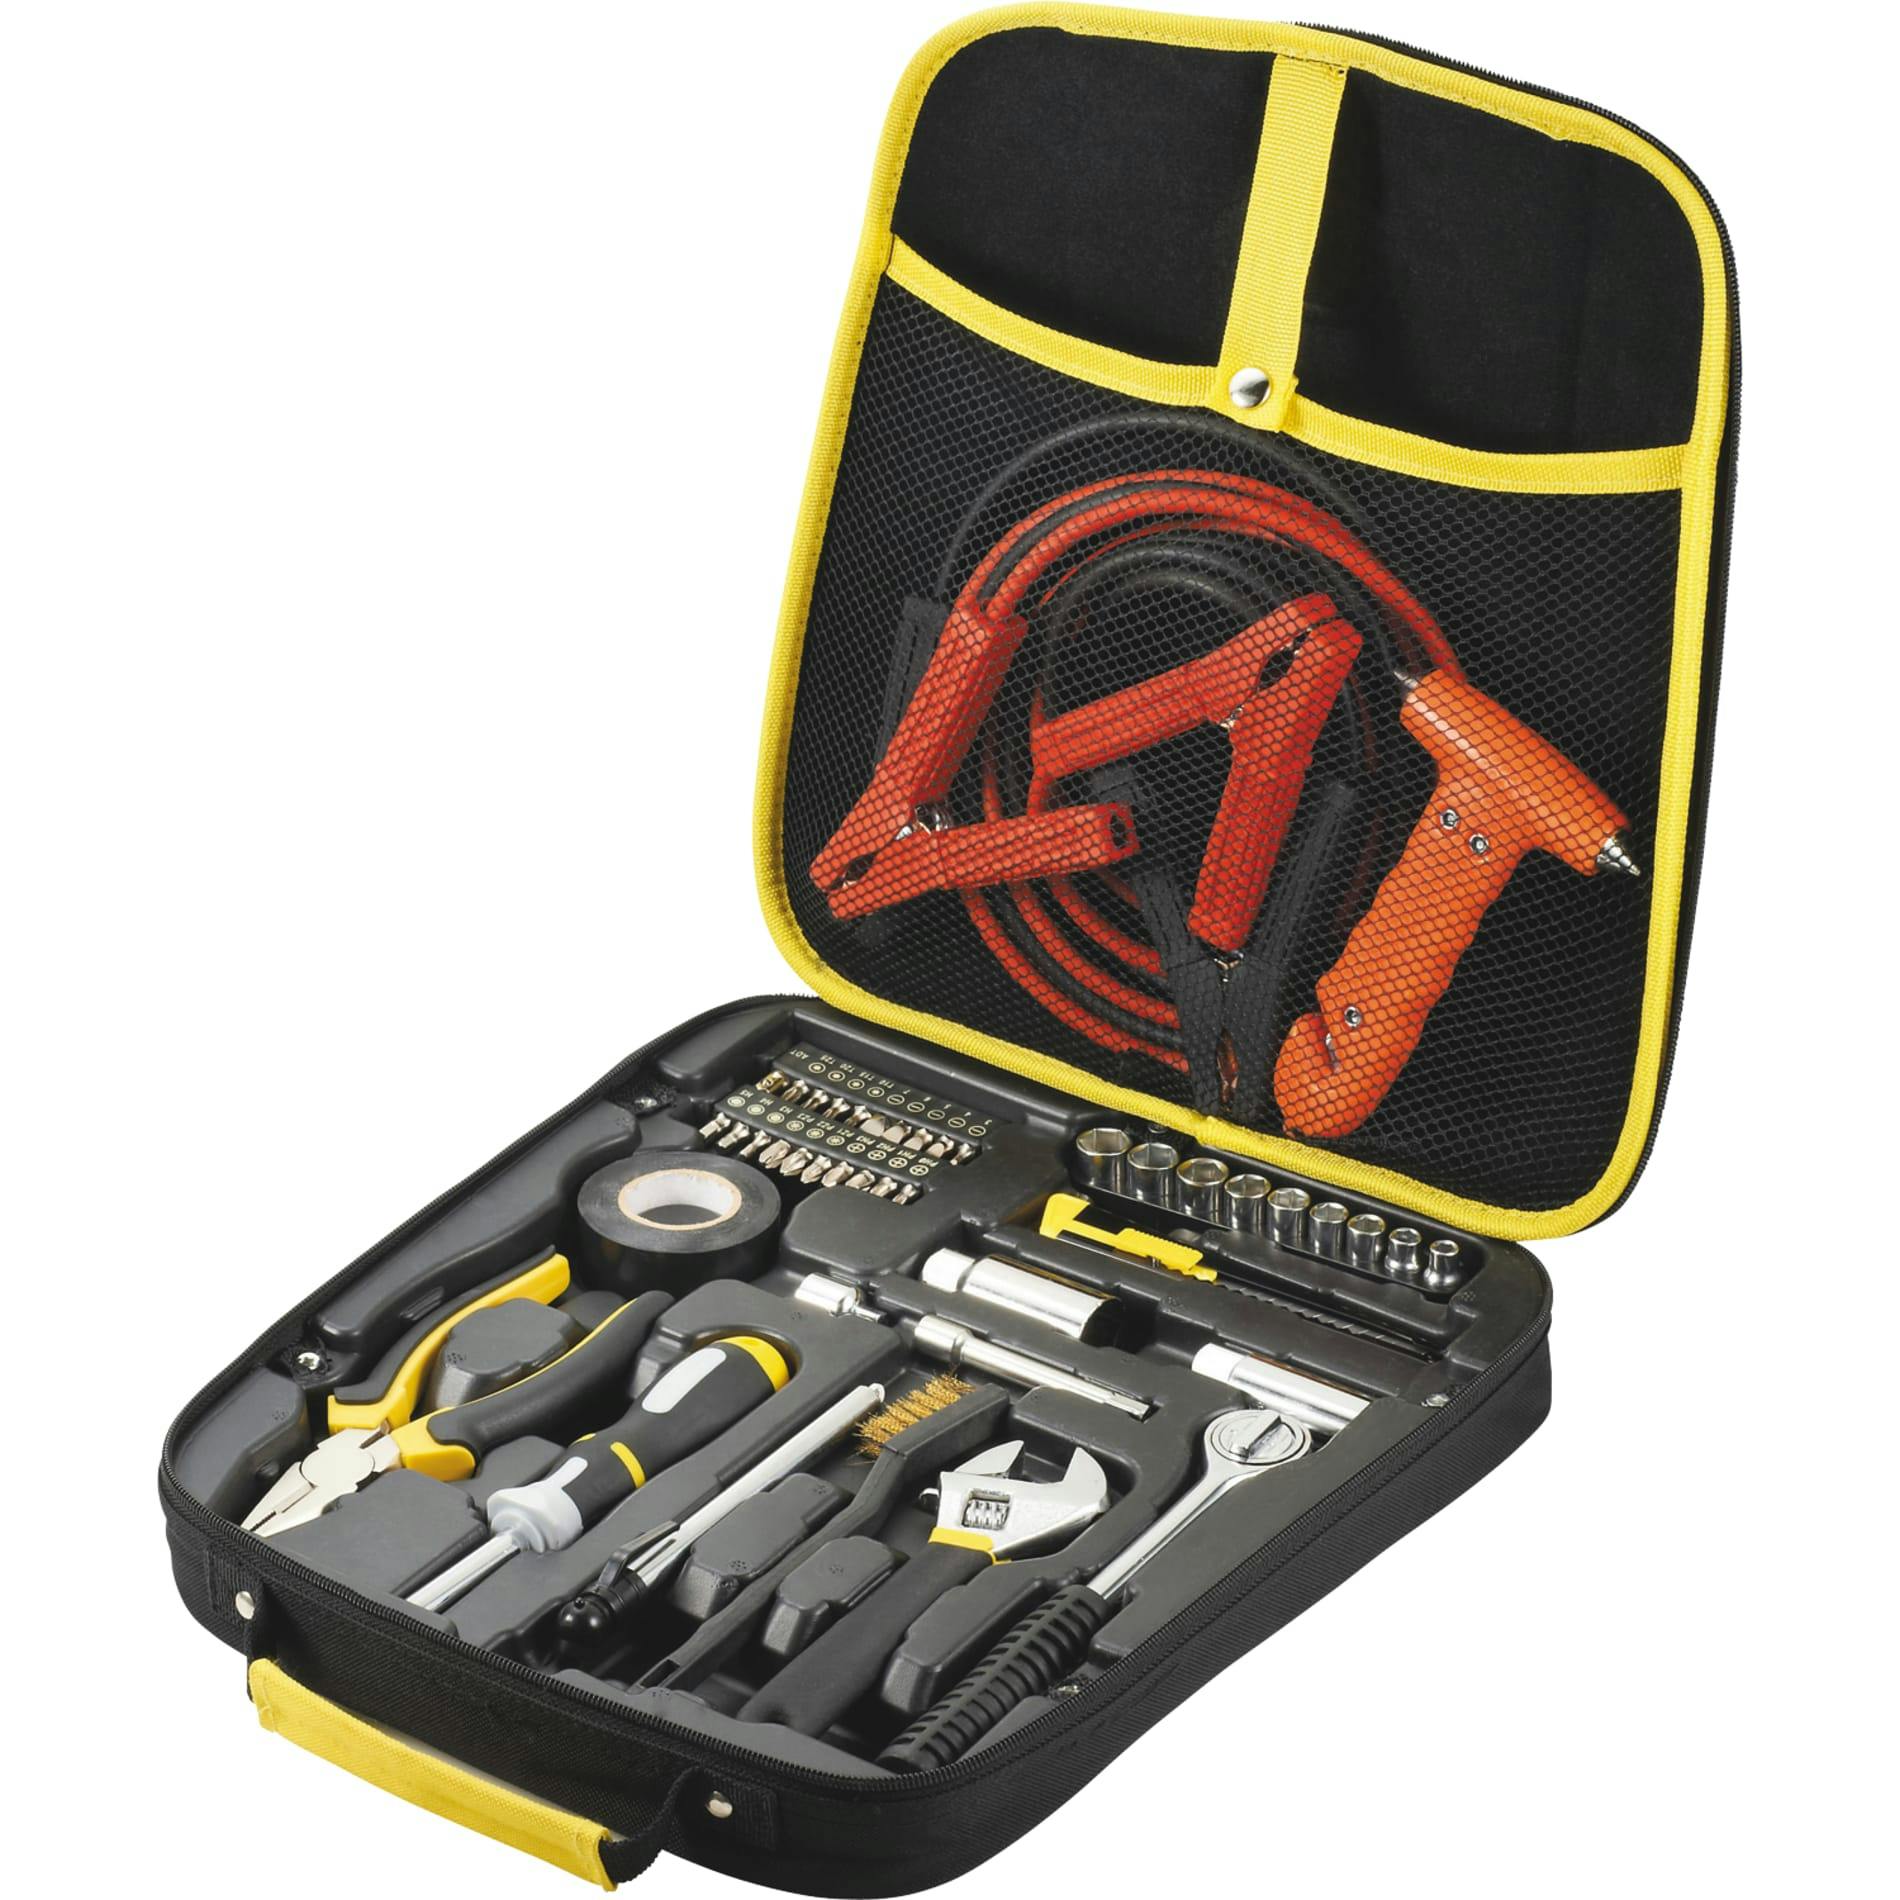 Highway Deluxe Roadside Kit with Tools - additional Image 8